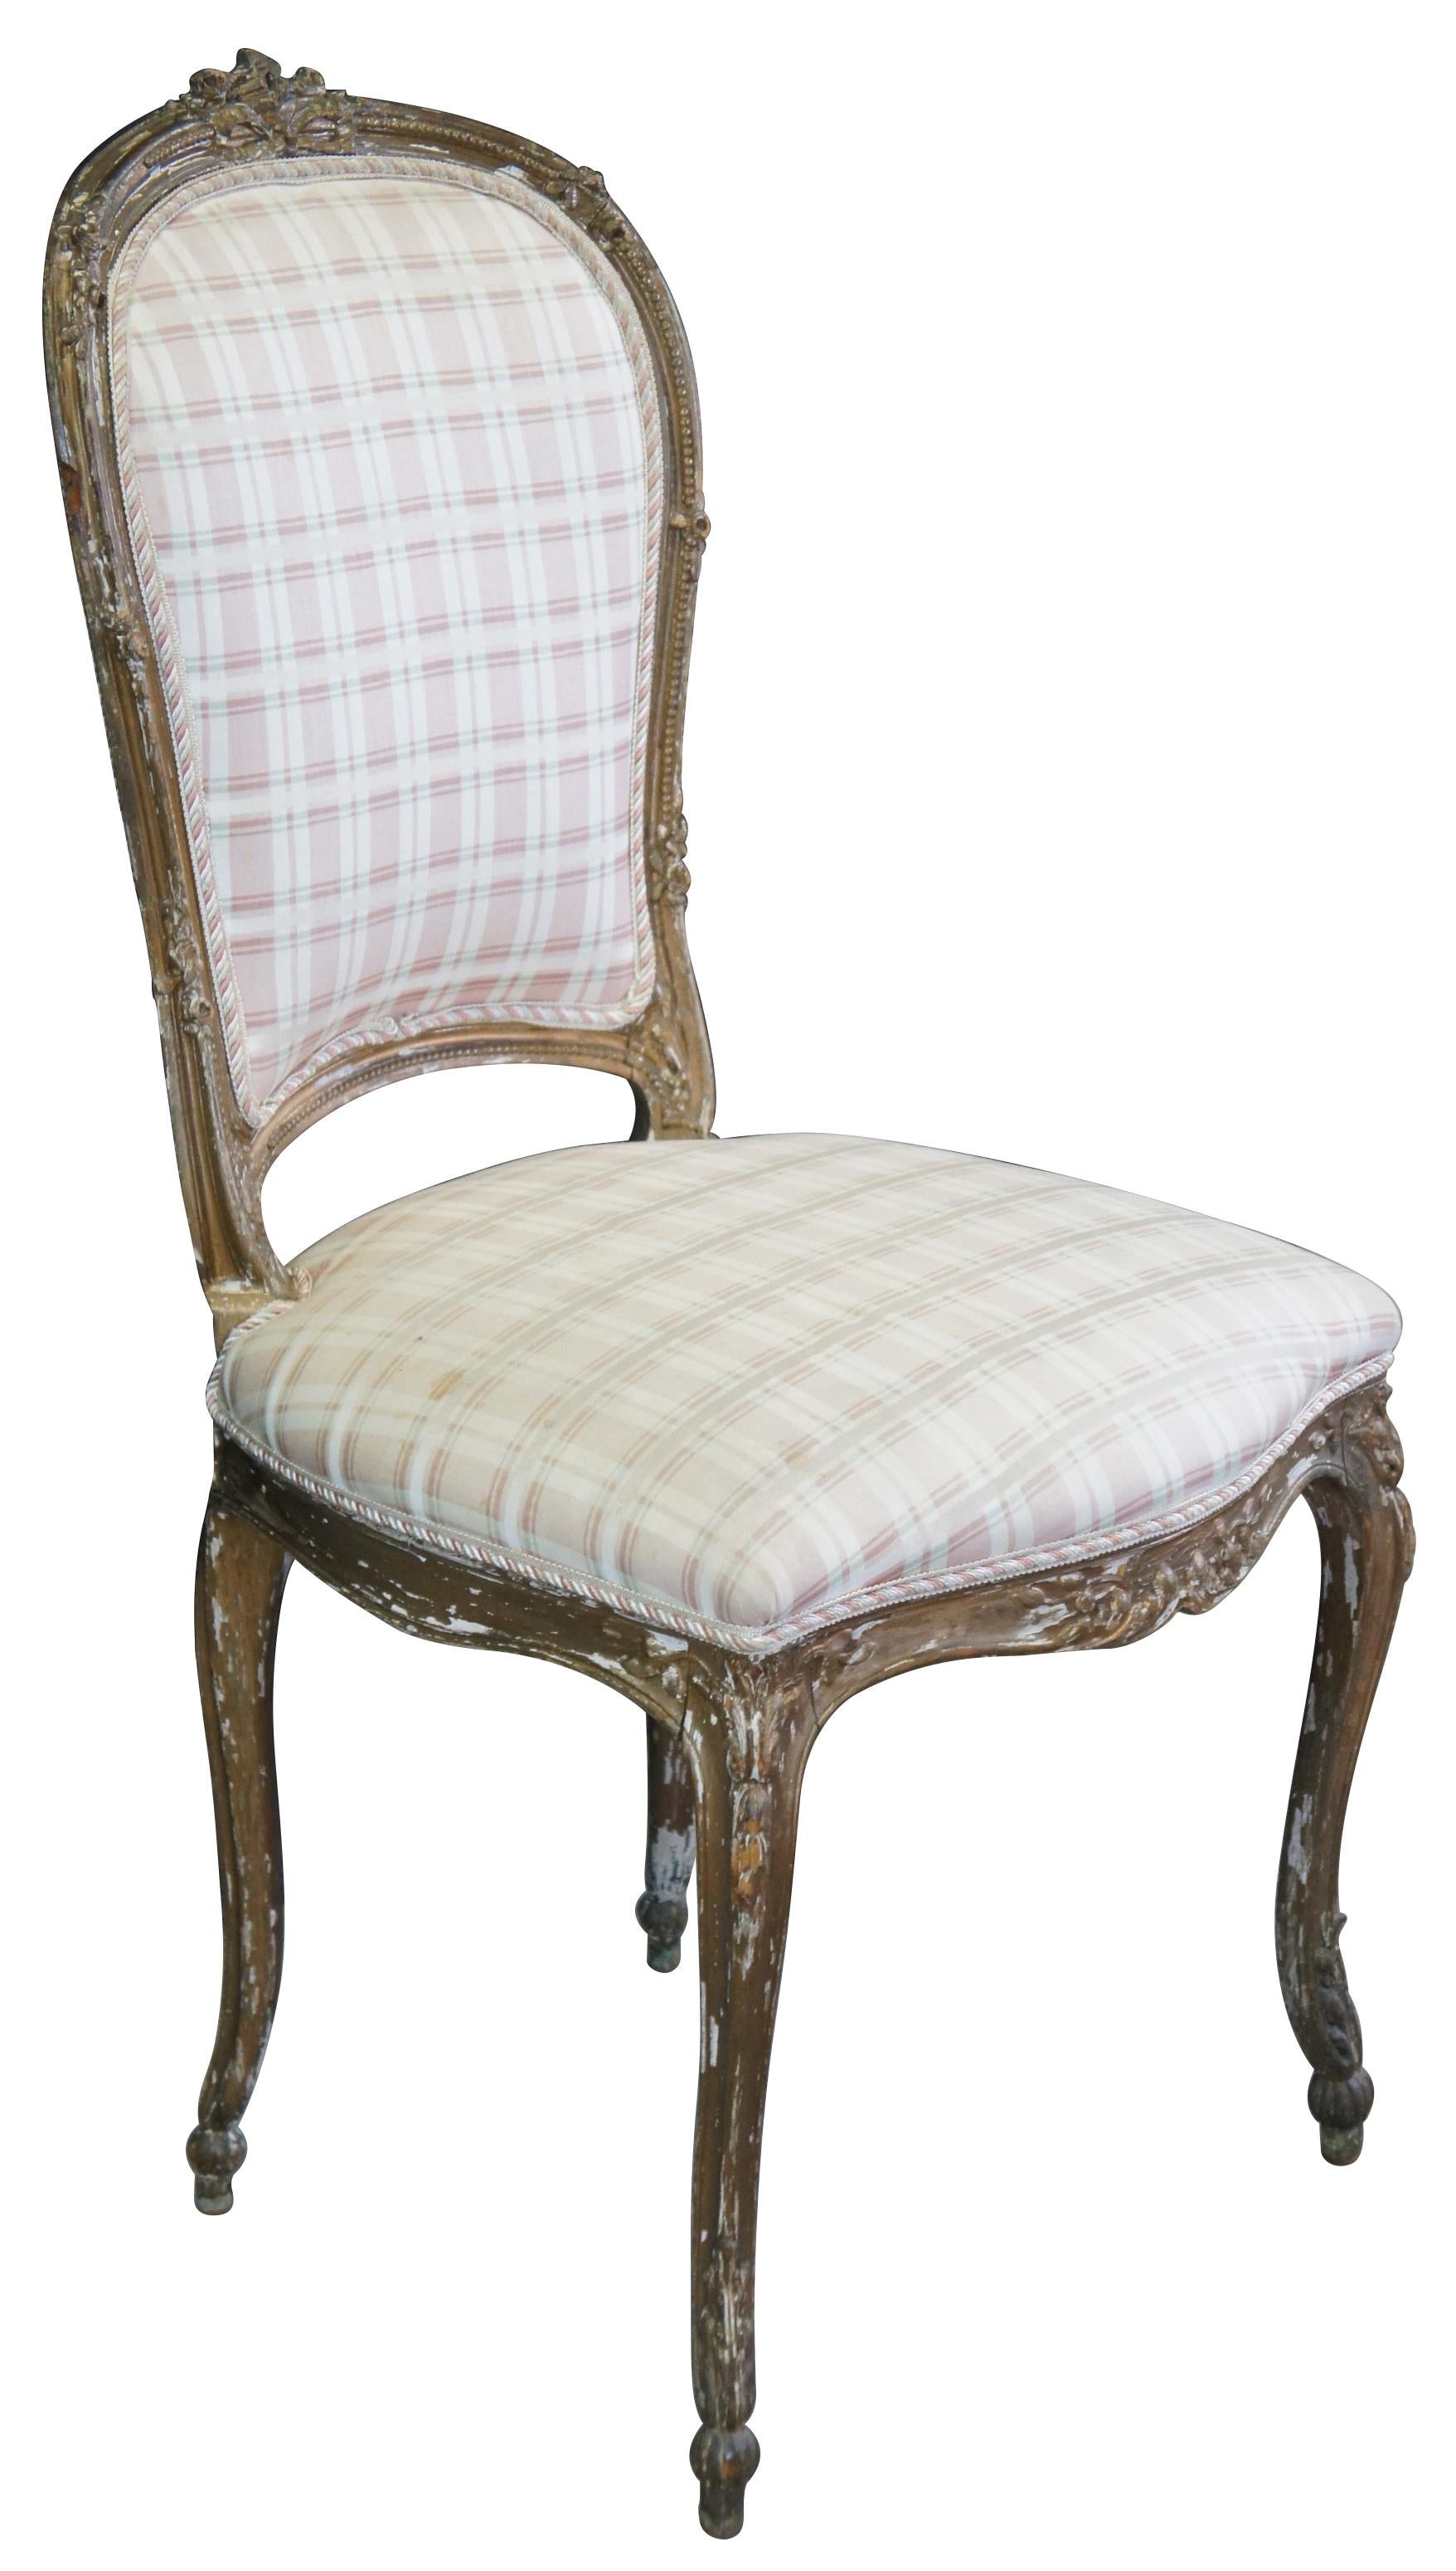 Antique French Louis XVI vanity chair featuring Neoclassical styling with carved ribbon crest, beaded and foliate accents, and serpentine legs with cabriole feet.

Measures: 18